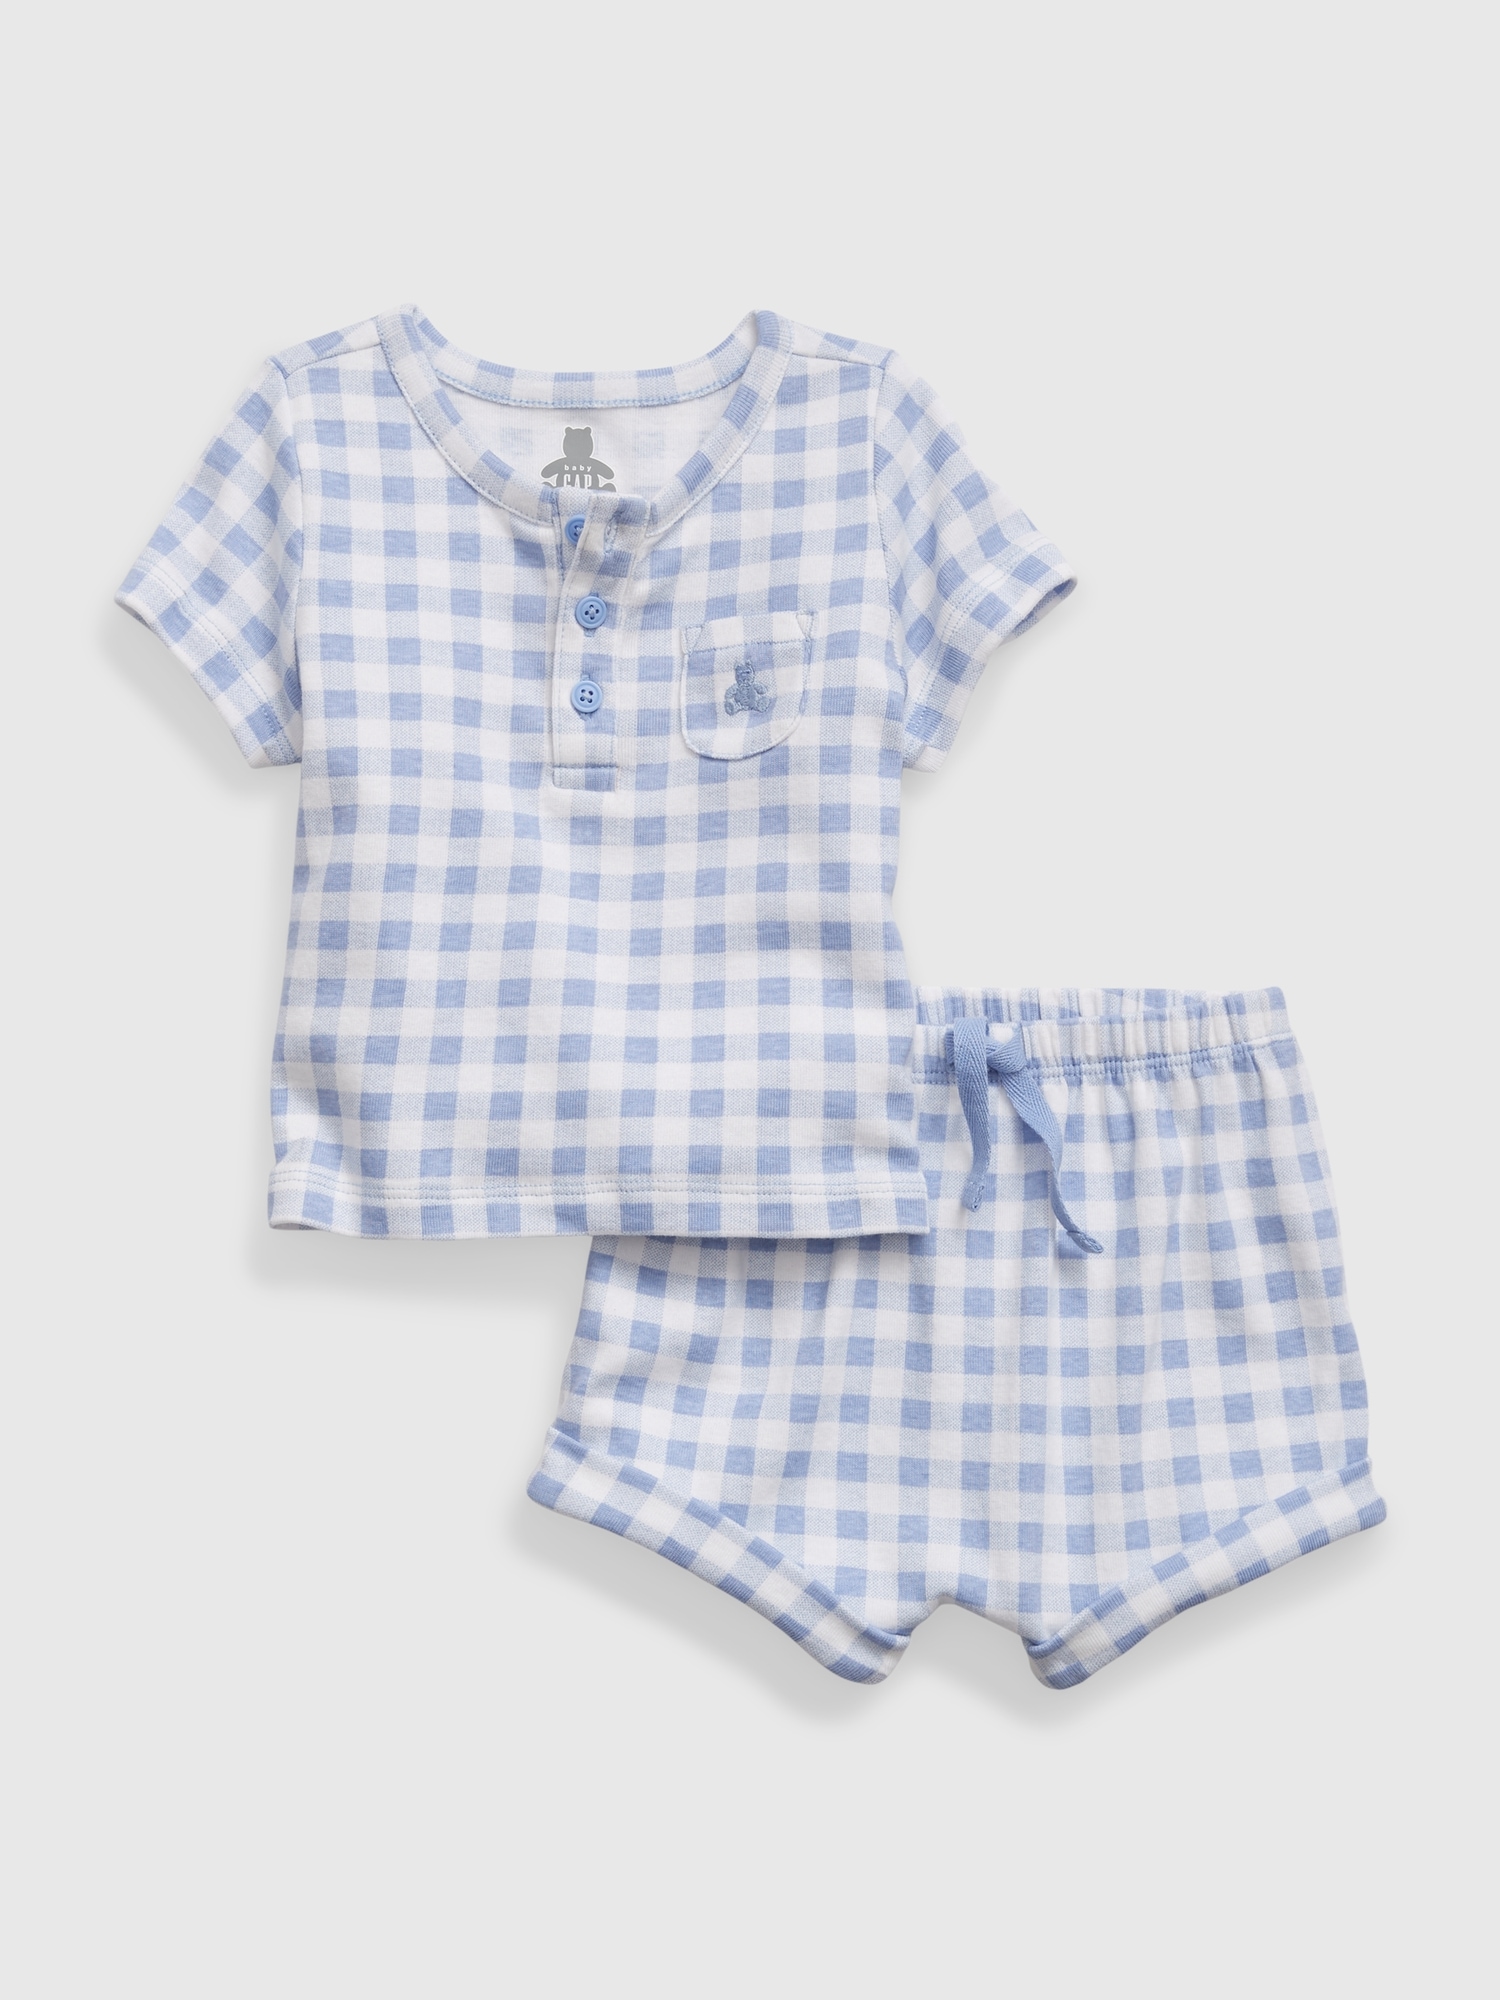 Gap Baby 100% Organic Cotton Henley Two-Piece Outfit Set blue. 1